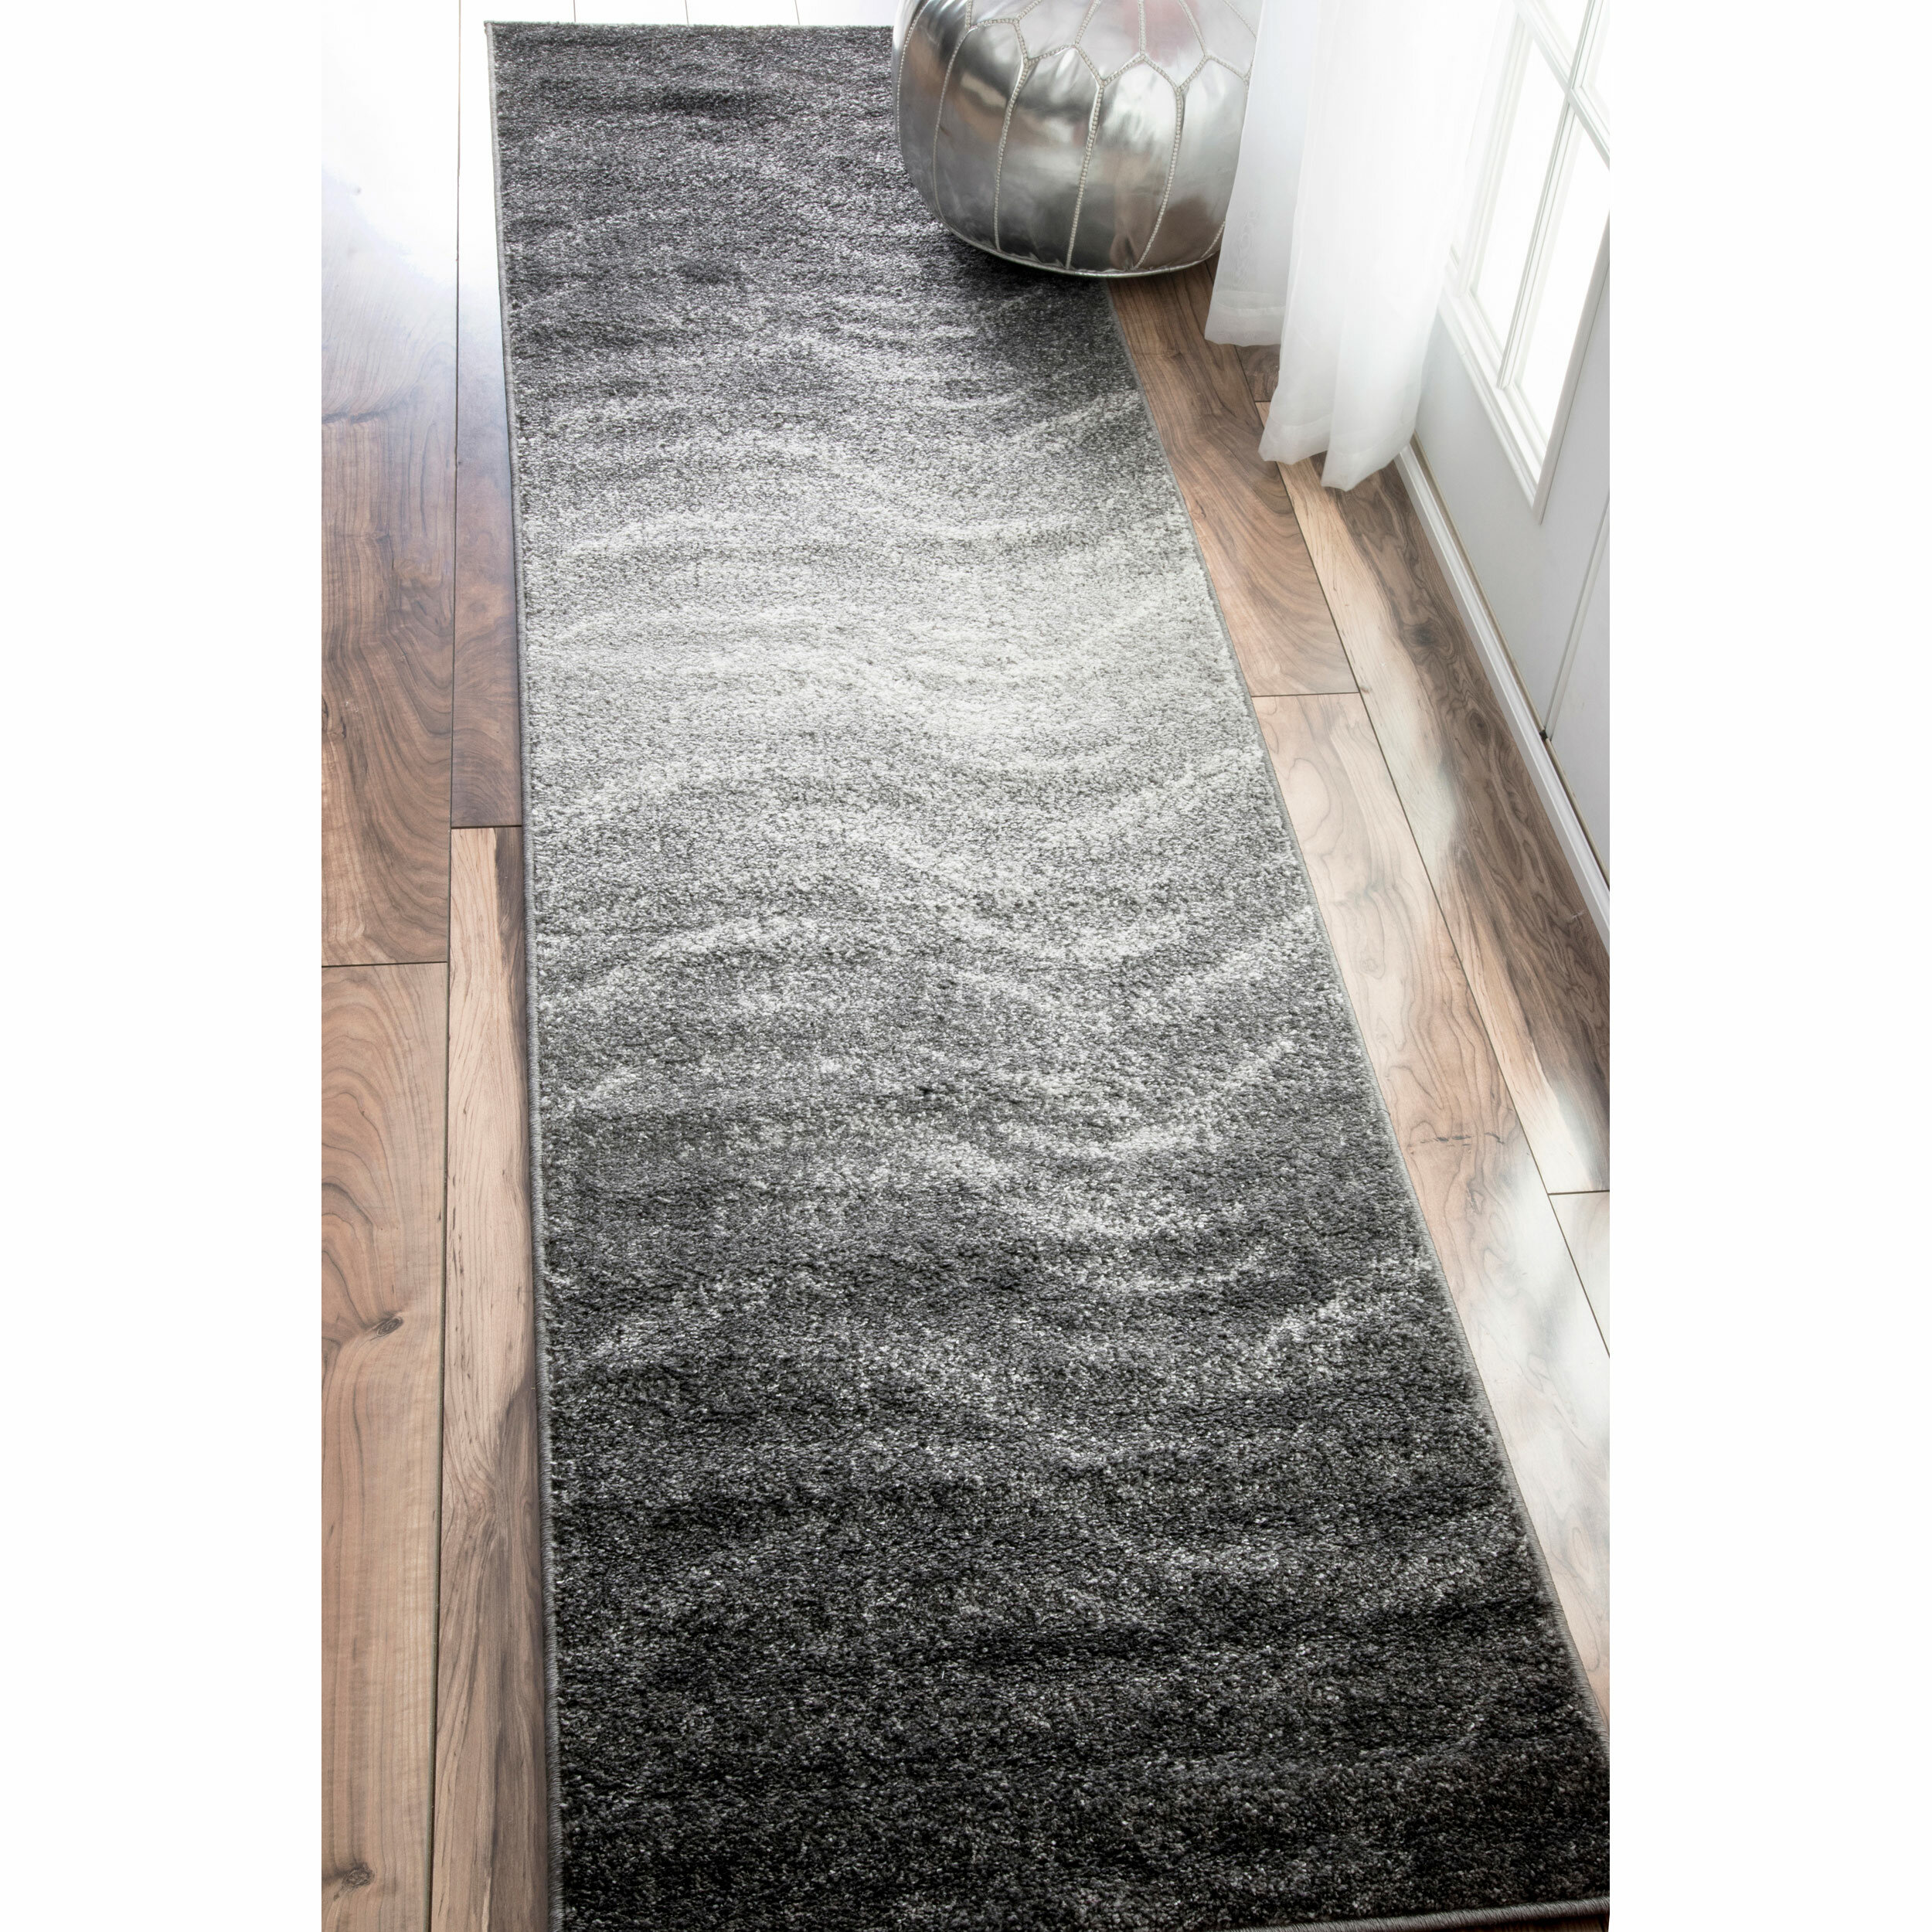 Runner 2.5'x9' Brick Walkway Pattern Play Indoor Runners with Many Sizes and Bond Finished Edges. Outdoor Area Rug Carpet 